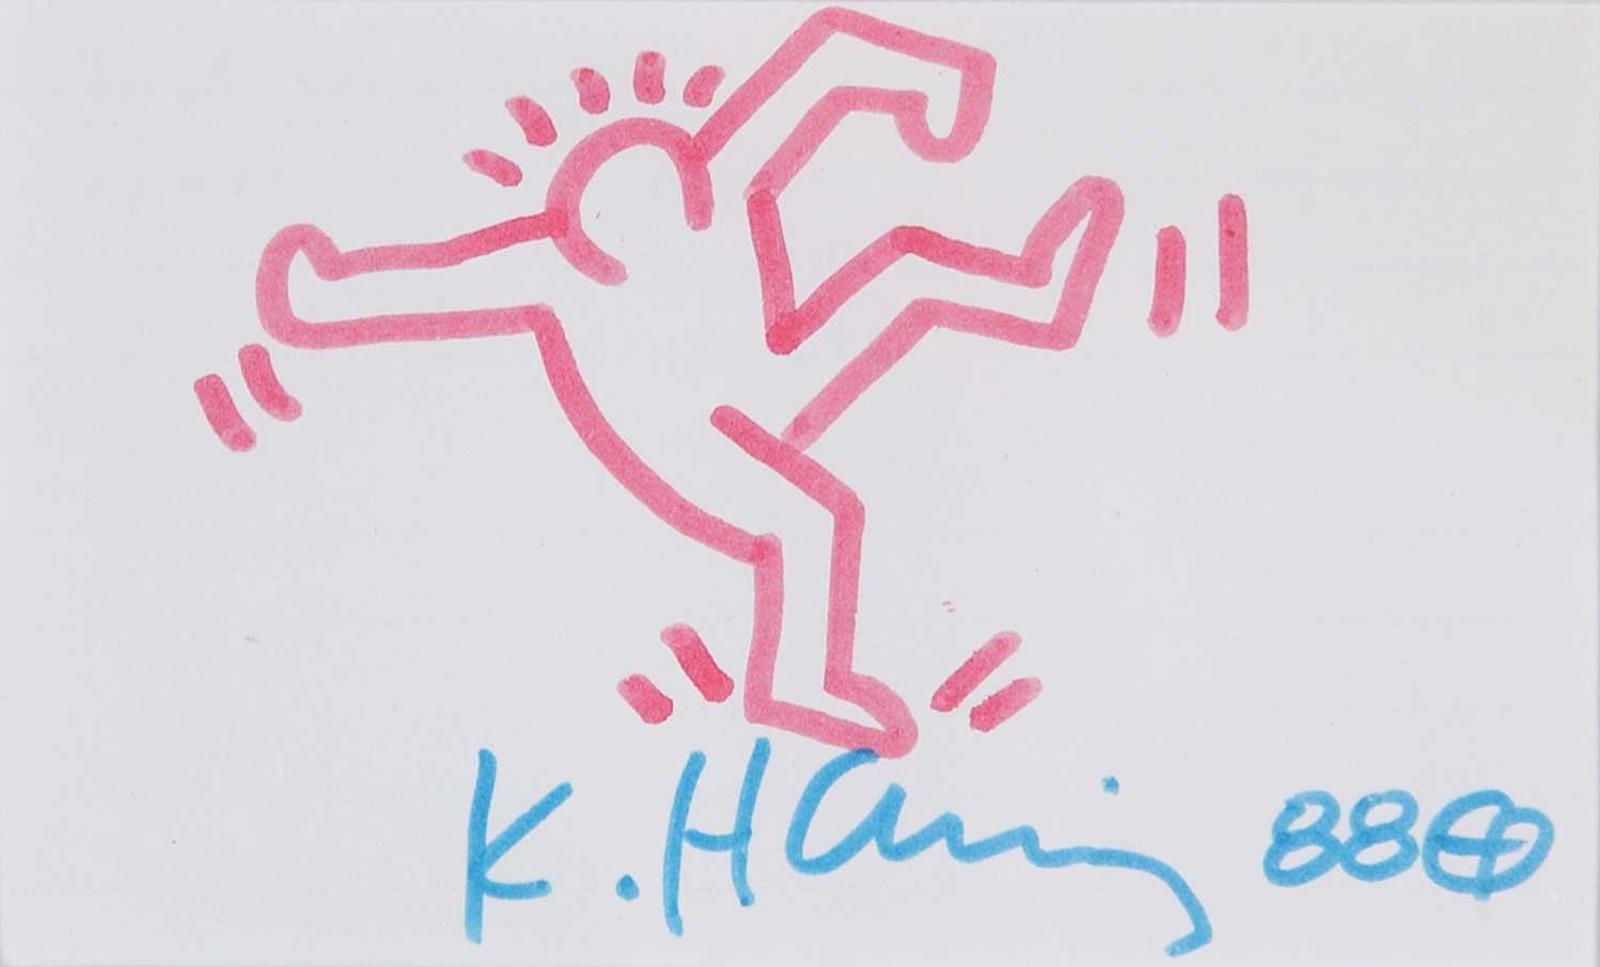 Keith Haring (1958-1990) - Untitled - One Leg Up Man